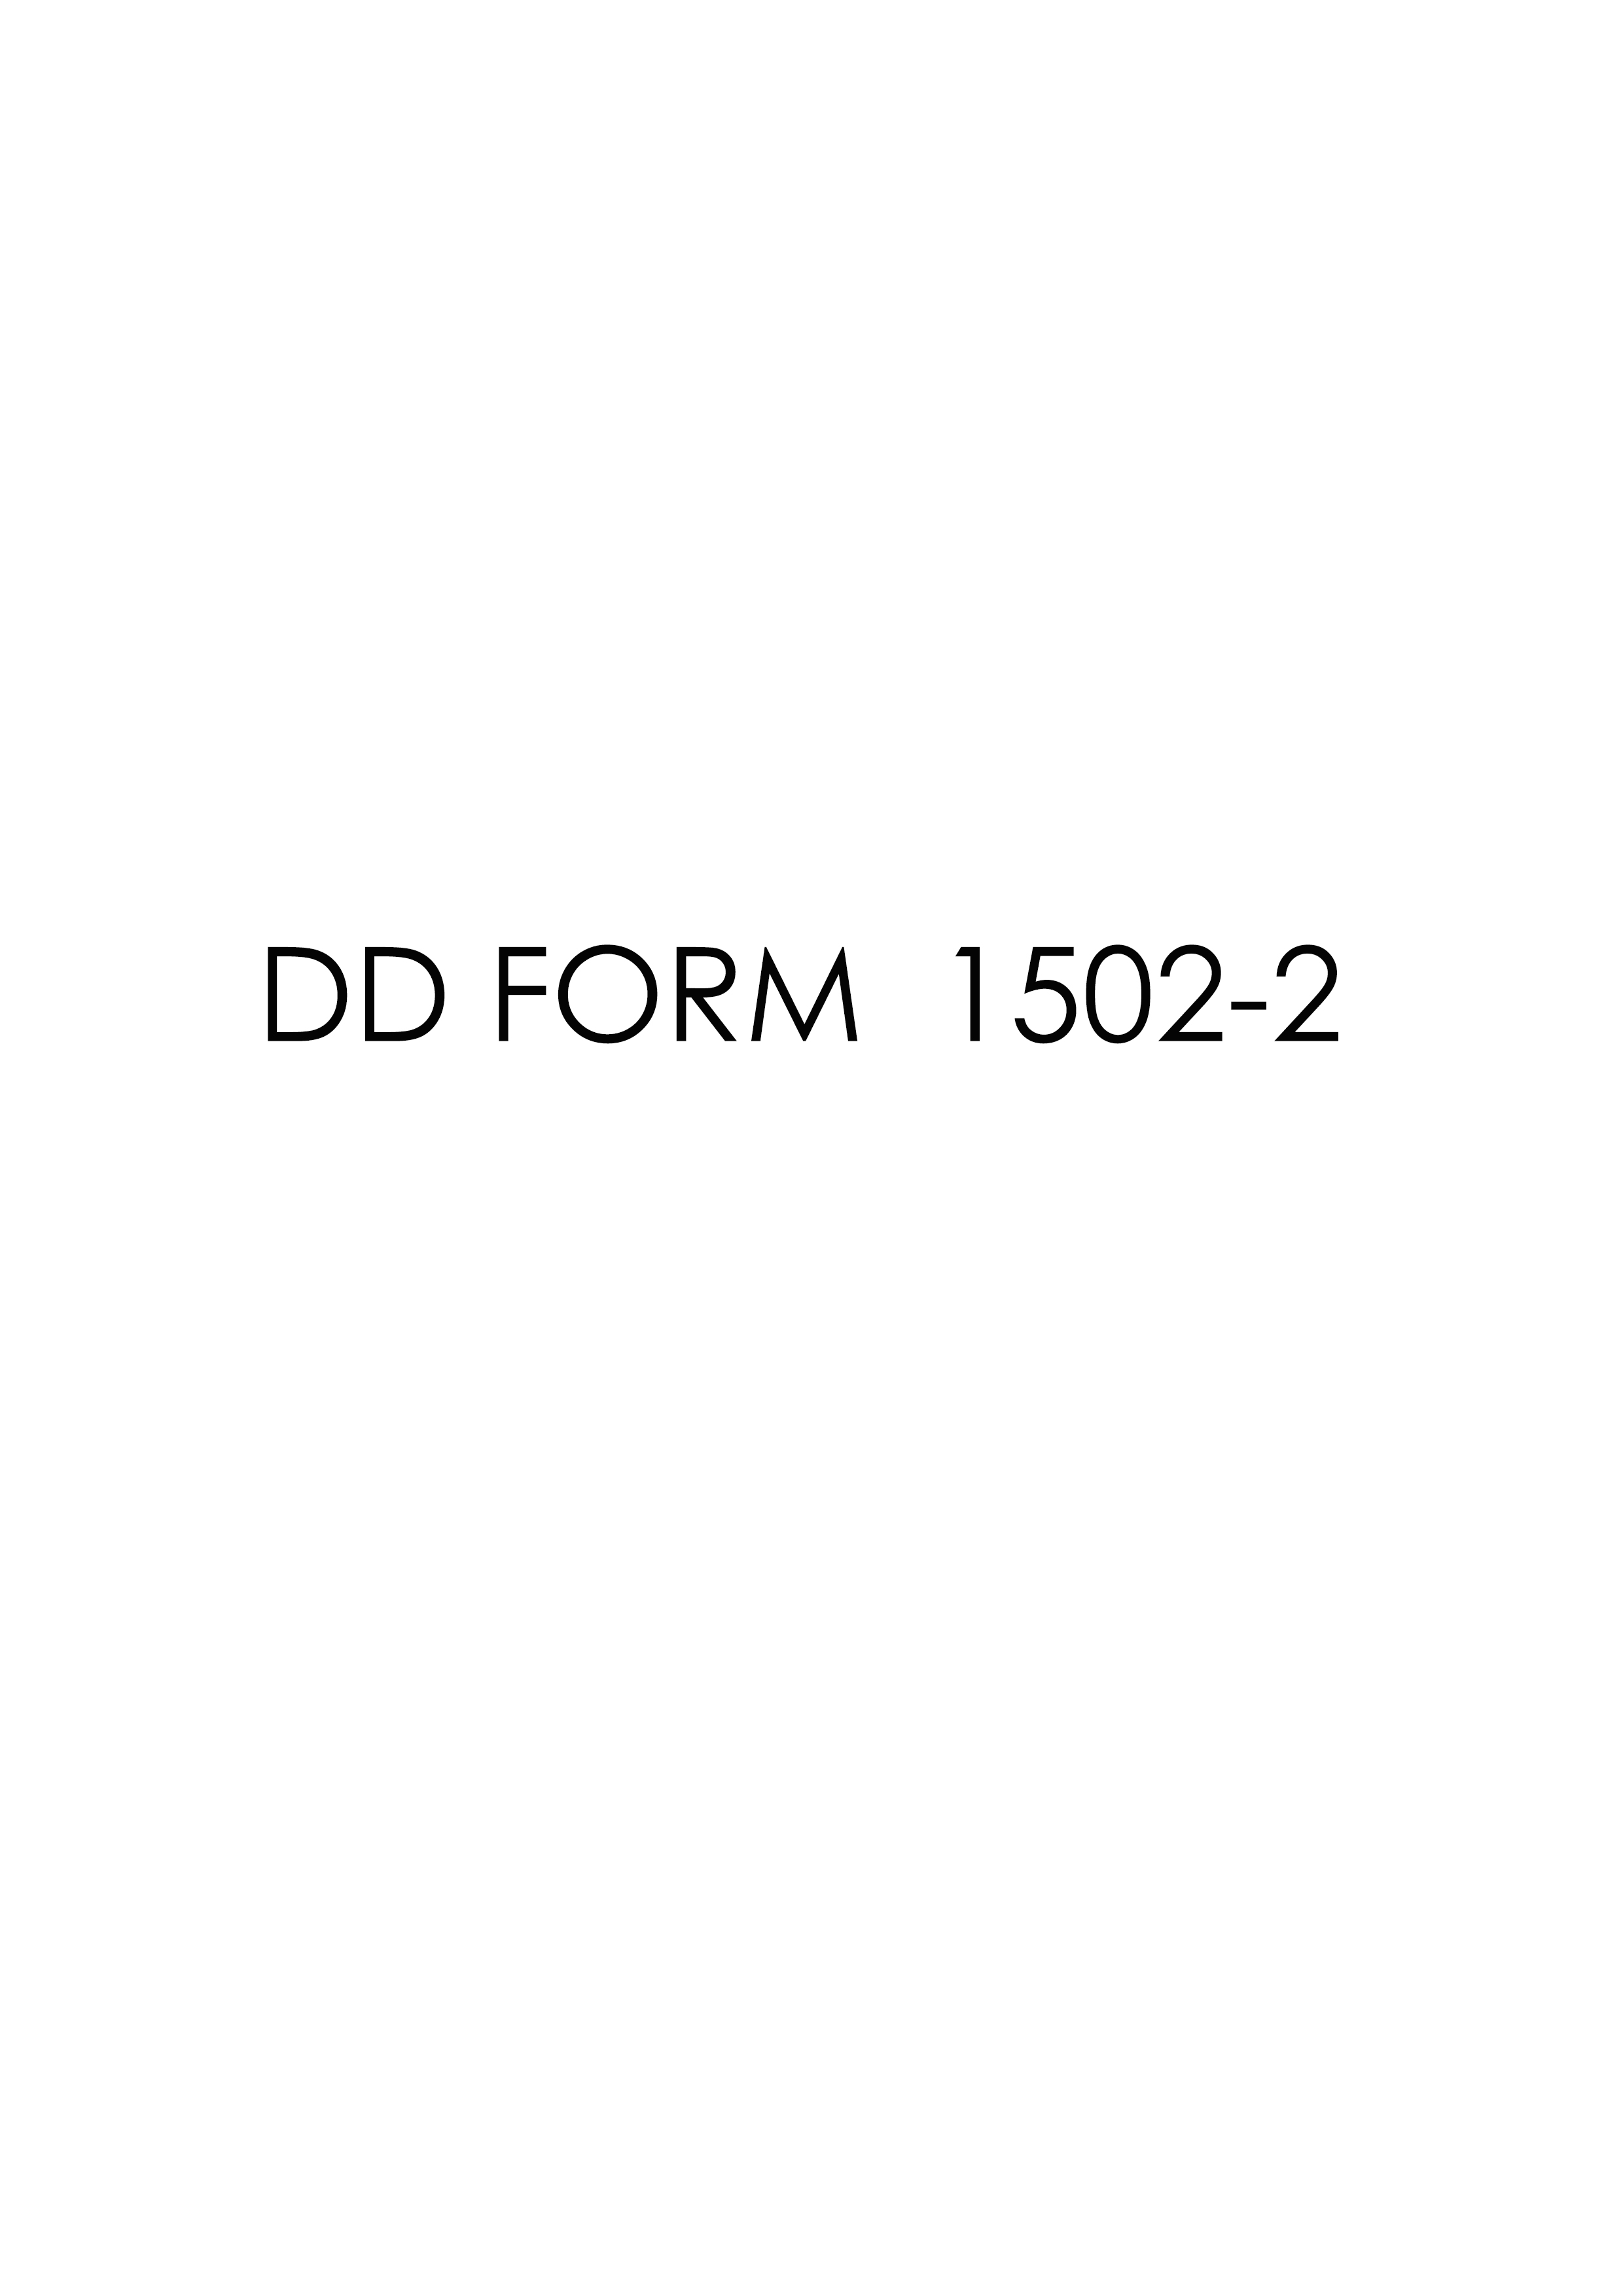 Download Fillable dd Form 1502-2